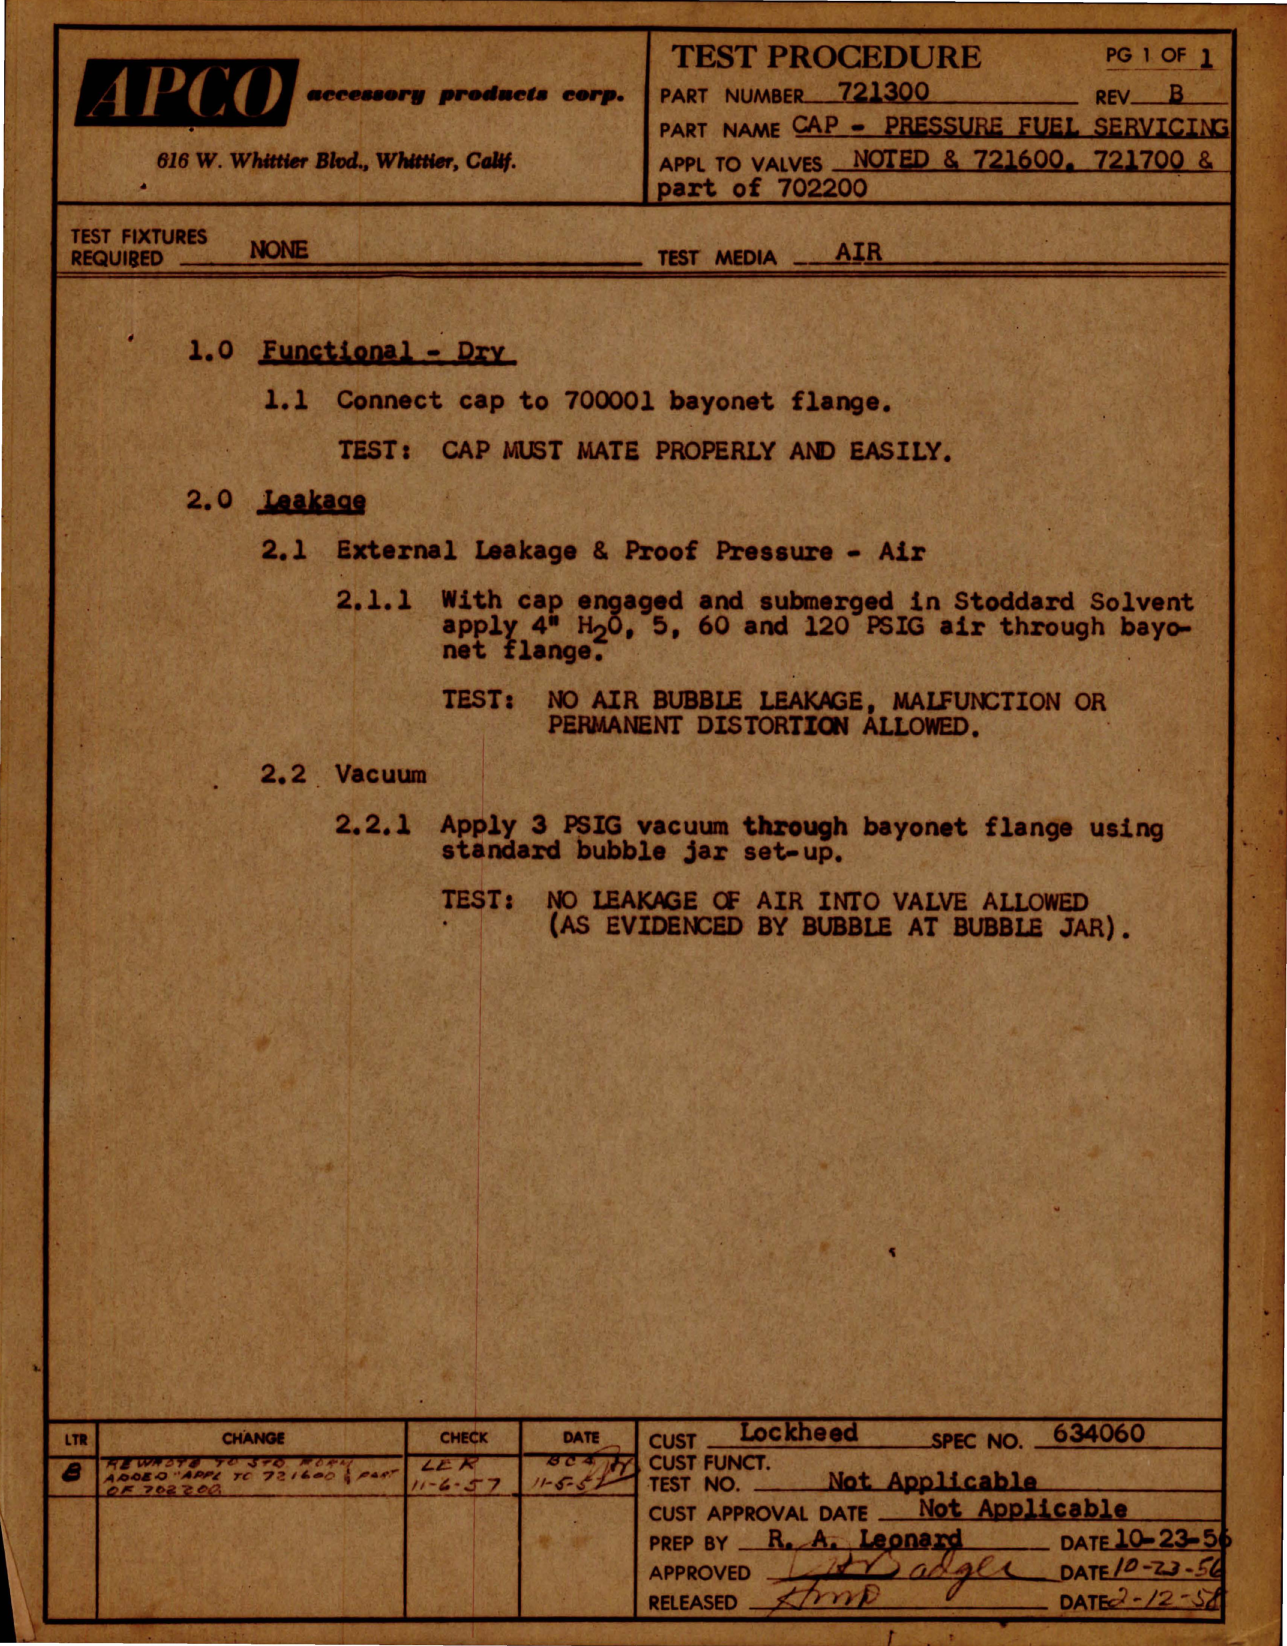 Sample page 1 from AirCorps Library document: Test Procedure for Pressure Fuel Servicing Cap - Part 721300 